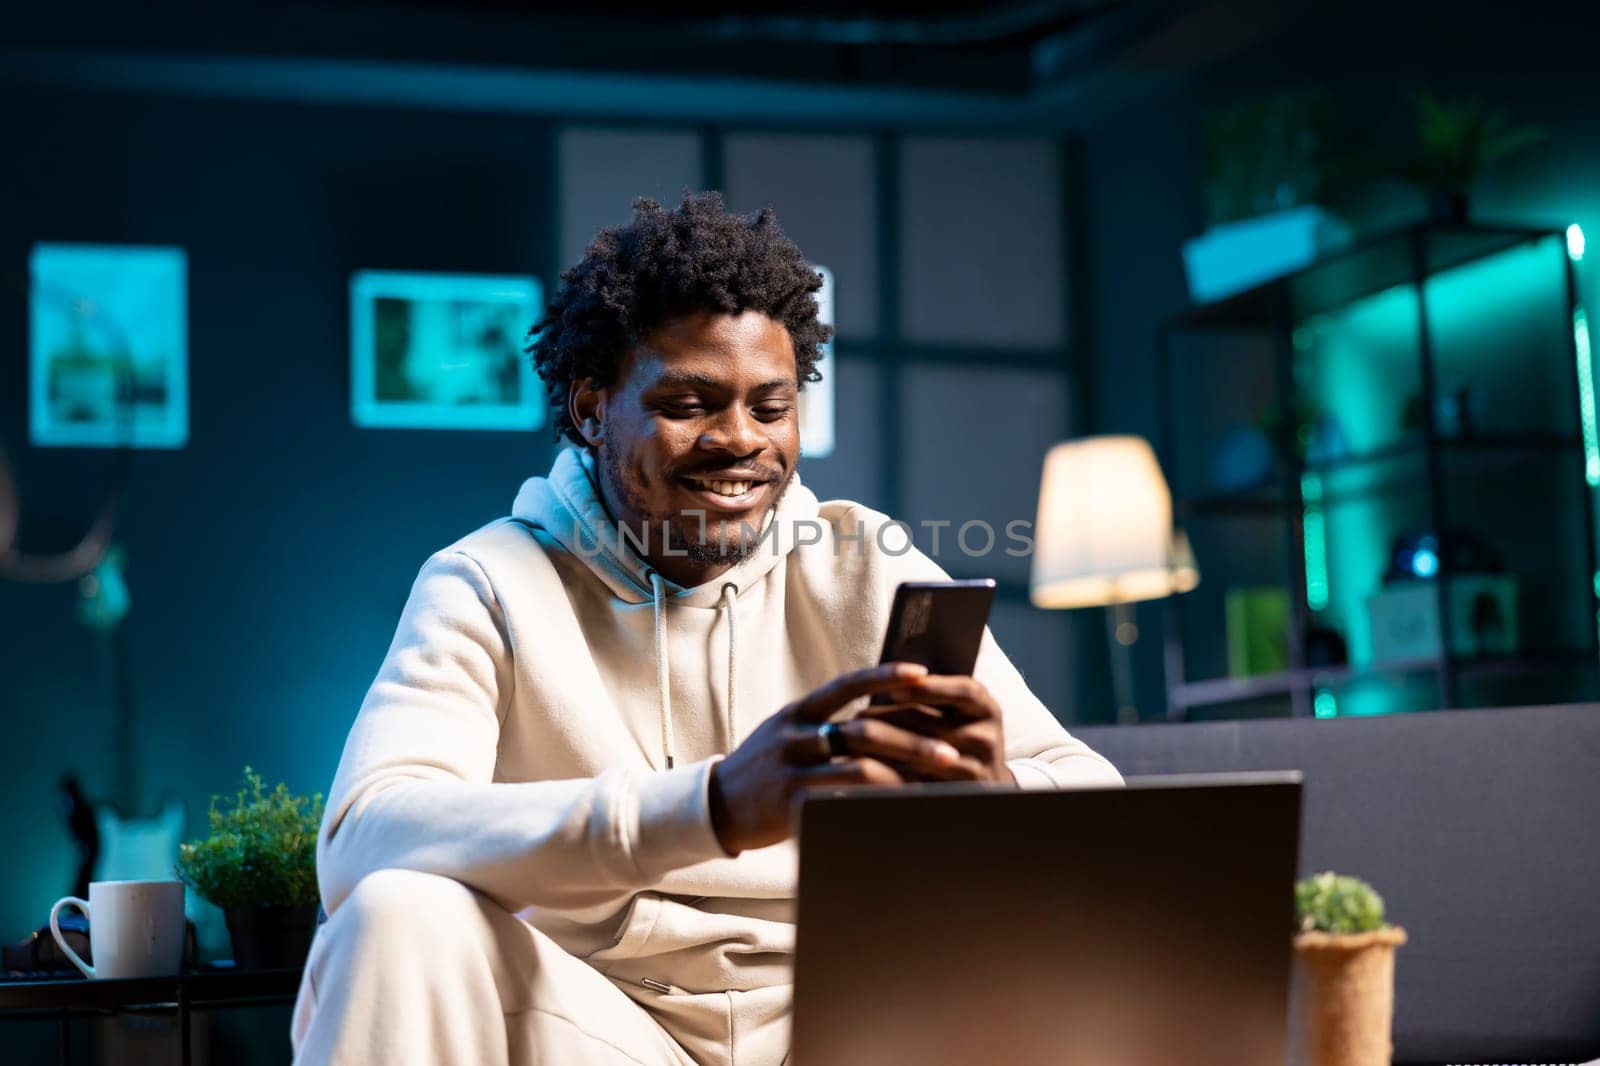 Smiling man at home taking break from work to write messages on phone. Joyous person holding cellphone talking with mates over online texting app before continuing project on laptop